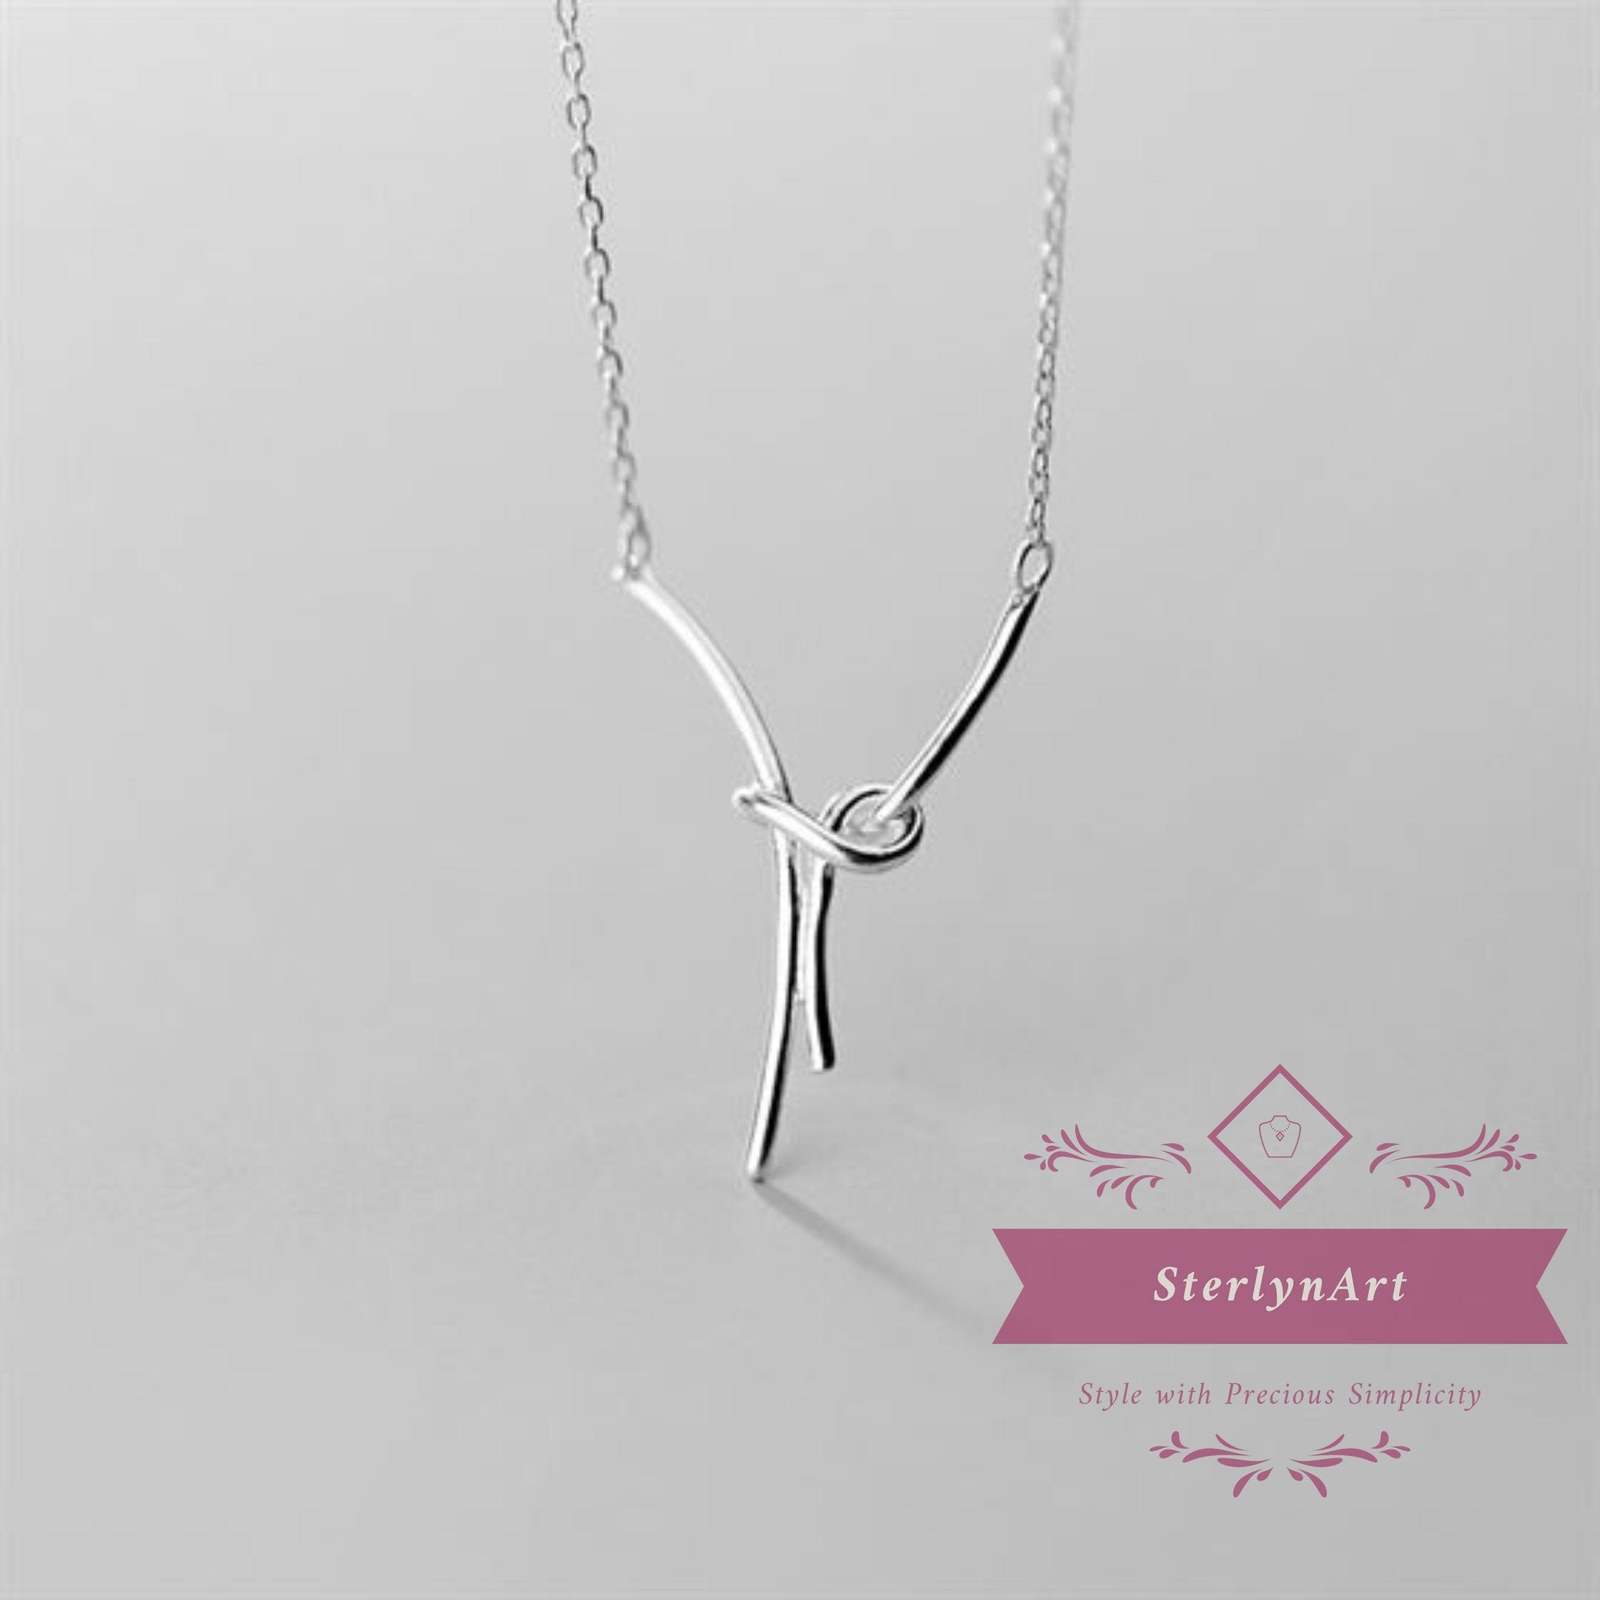 Entangled Knot • 925 Sterling Silver • Beautifully Handcrafted Charm Necklace fo